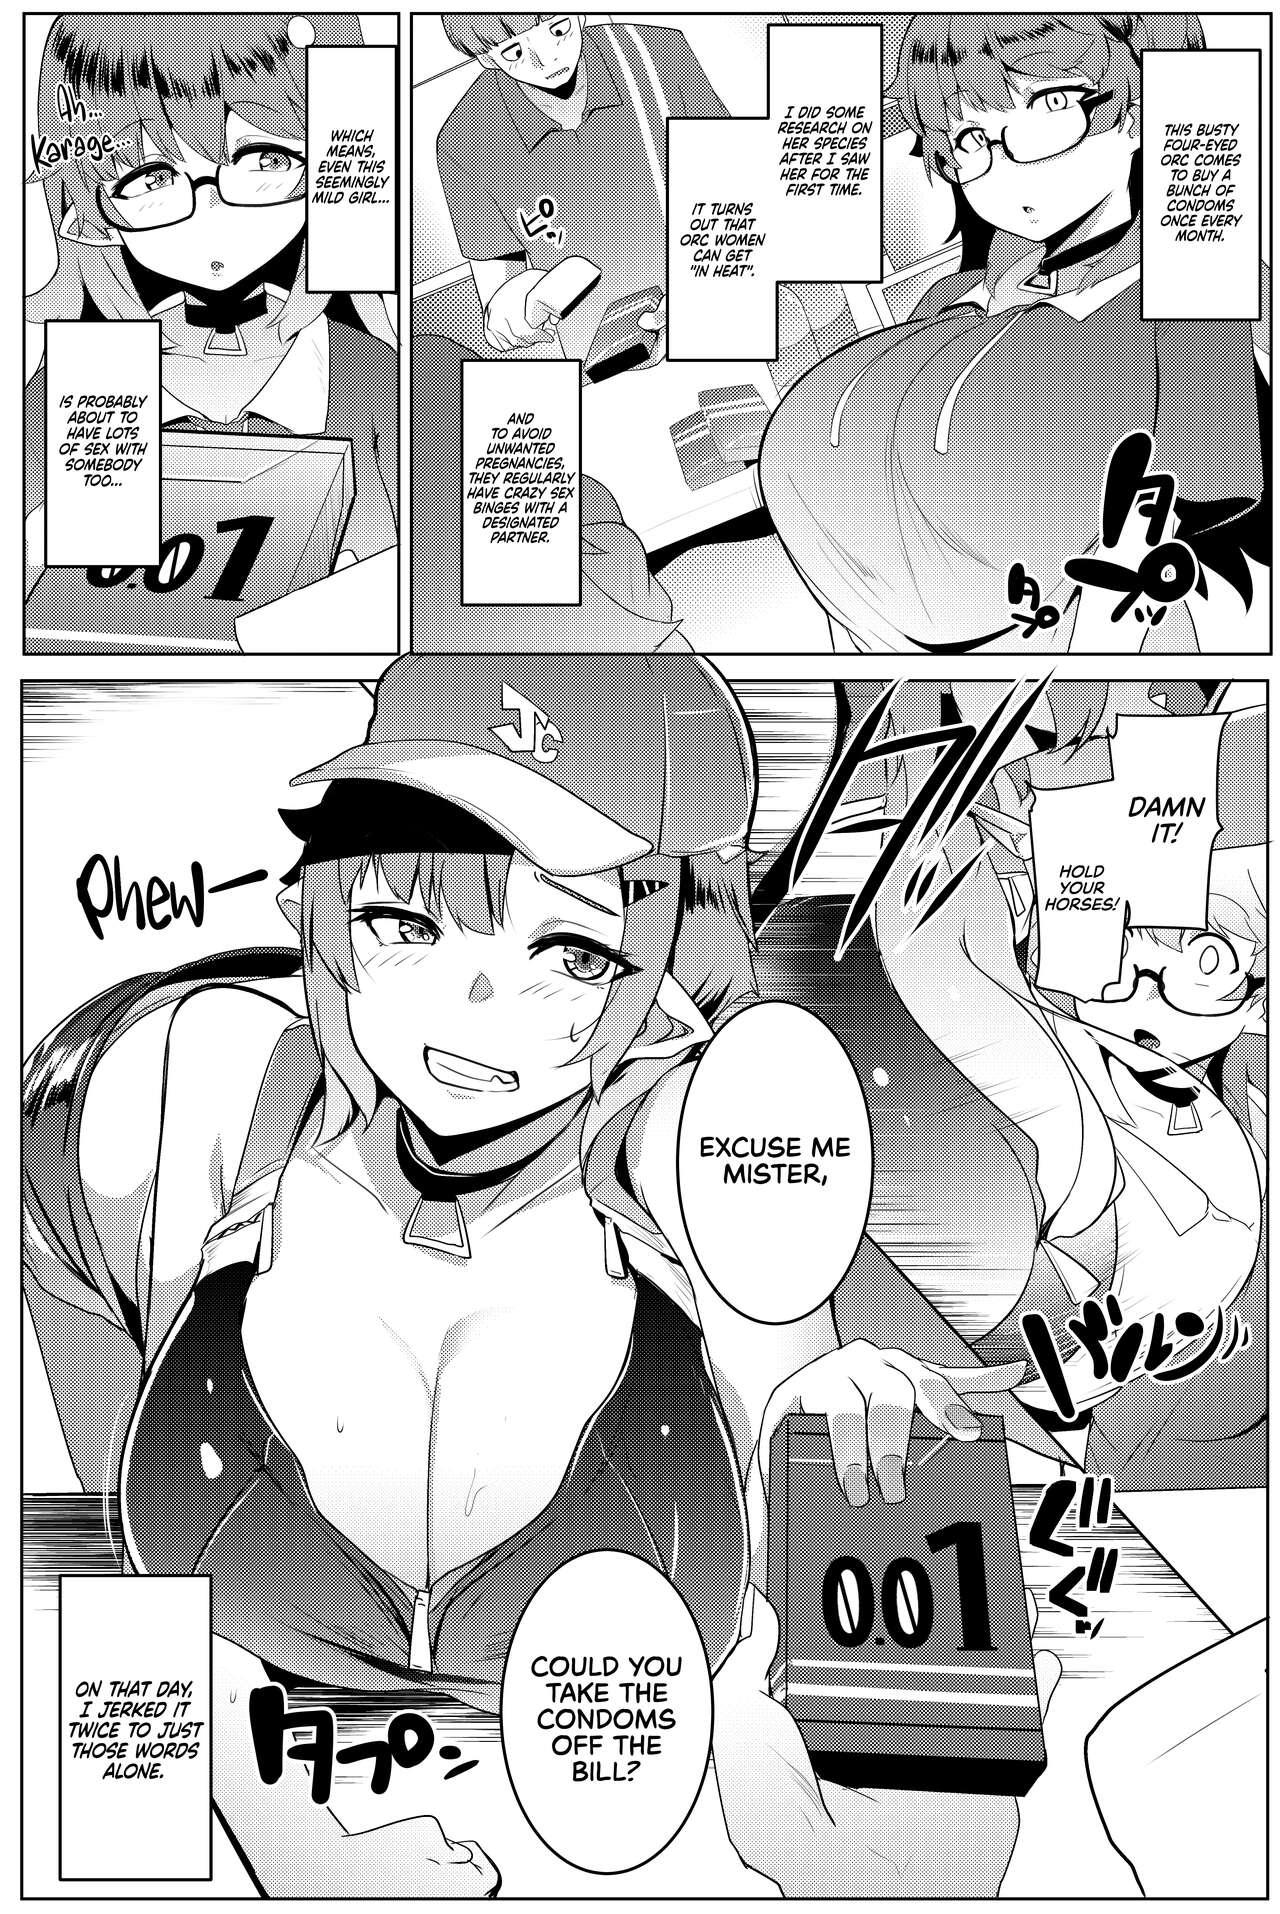 Tgirl Imouto wa Mesu Orc 5 | My Little Sisters are Slutty Orcs 5 - Original Cum In Mouth - Page 5